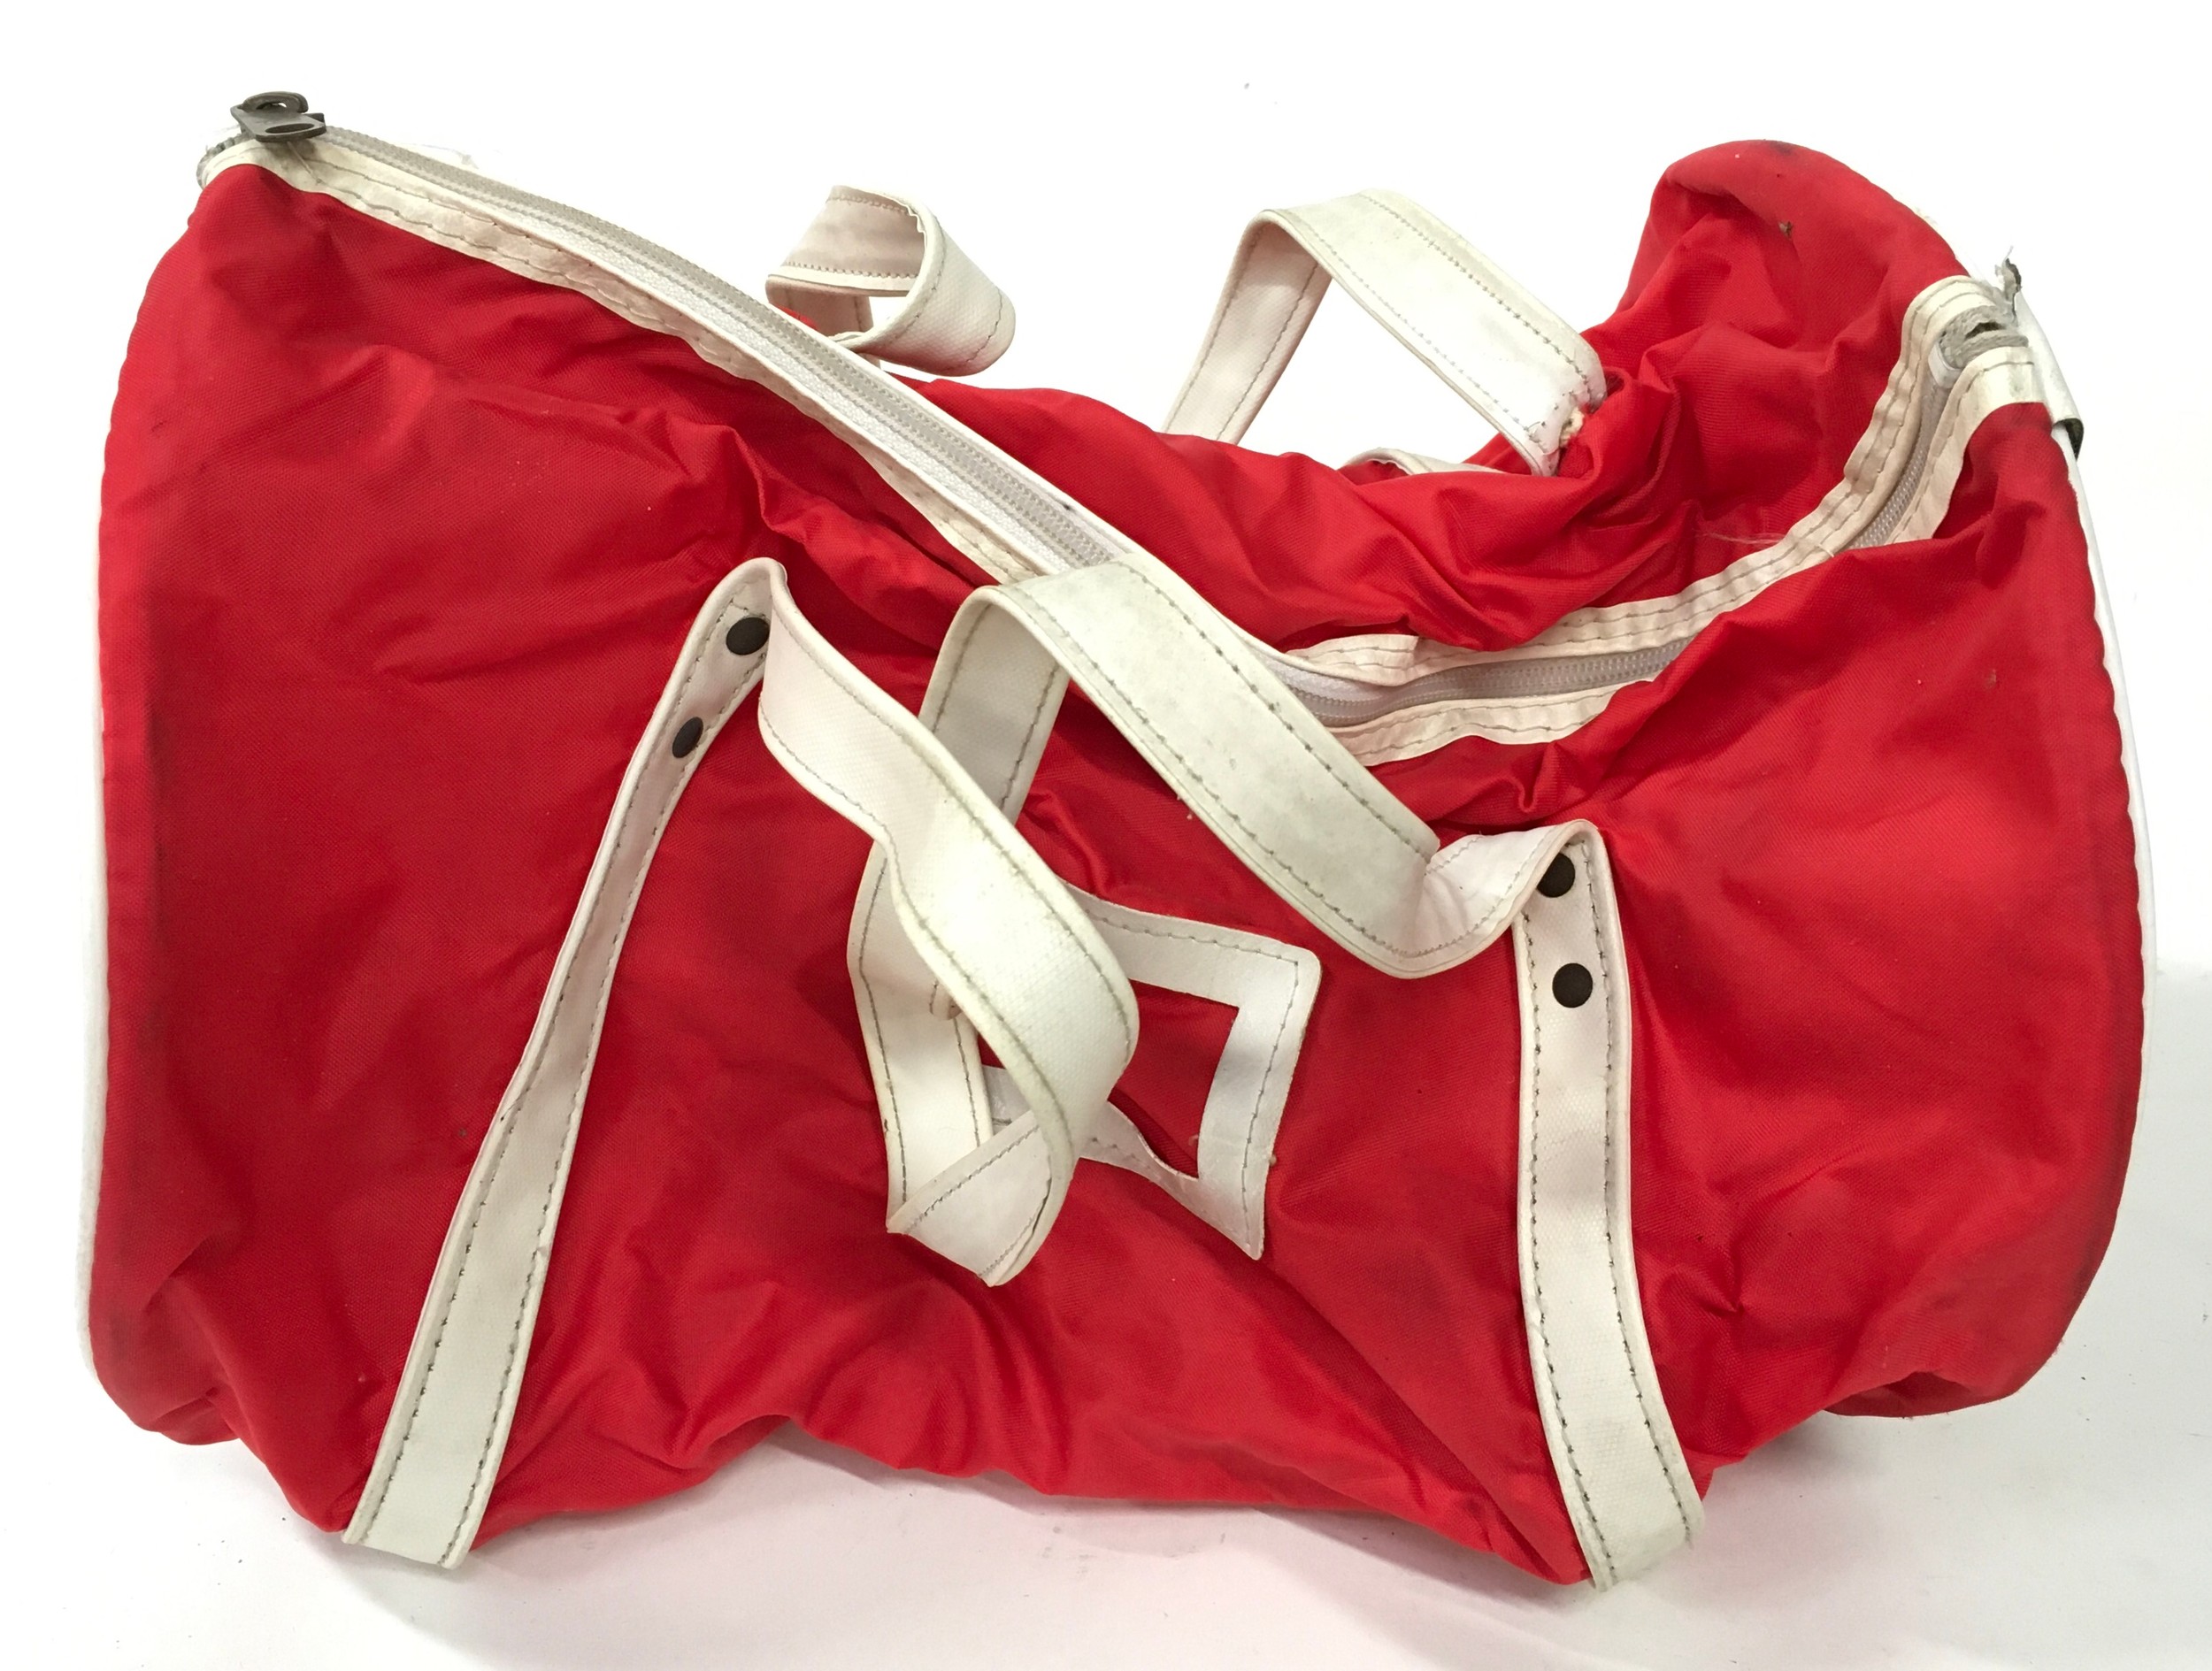 Two vintage 1970's British Airways shoulder bags together with a Speedo Bag. - Image 5 of 5